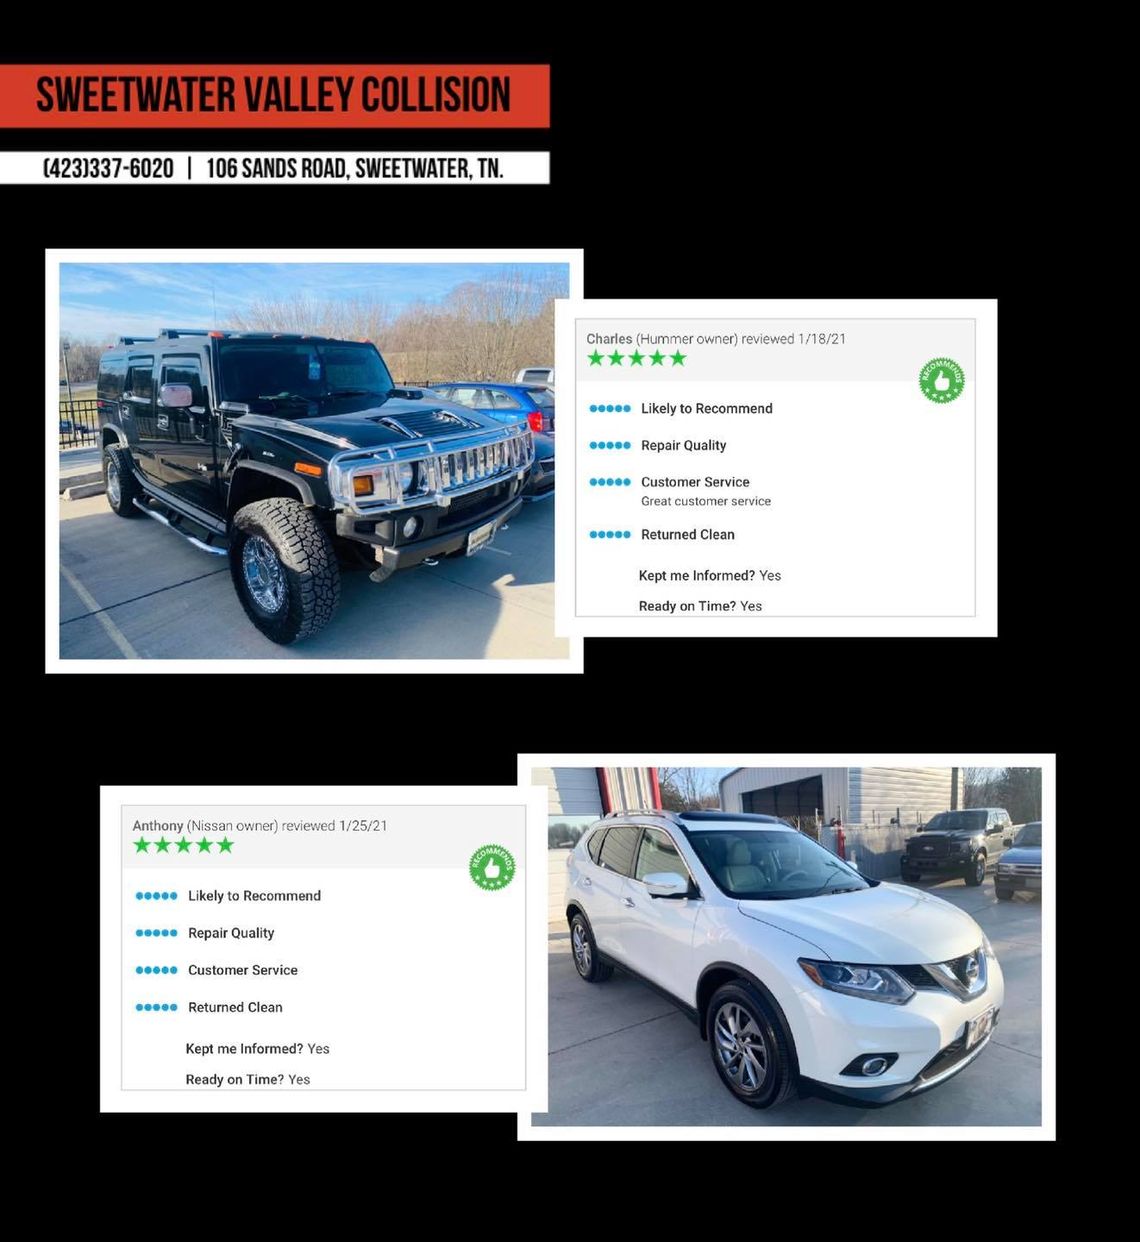 Hummer and Nissan Review — Sweetwater, TN — Sweetwater Valley Collision